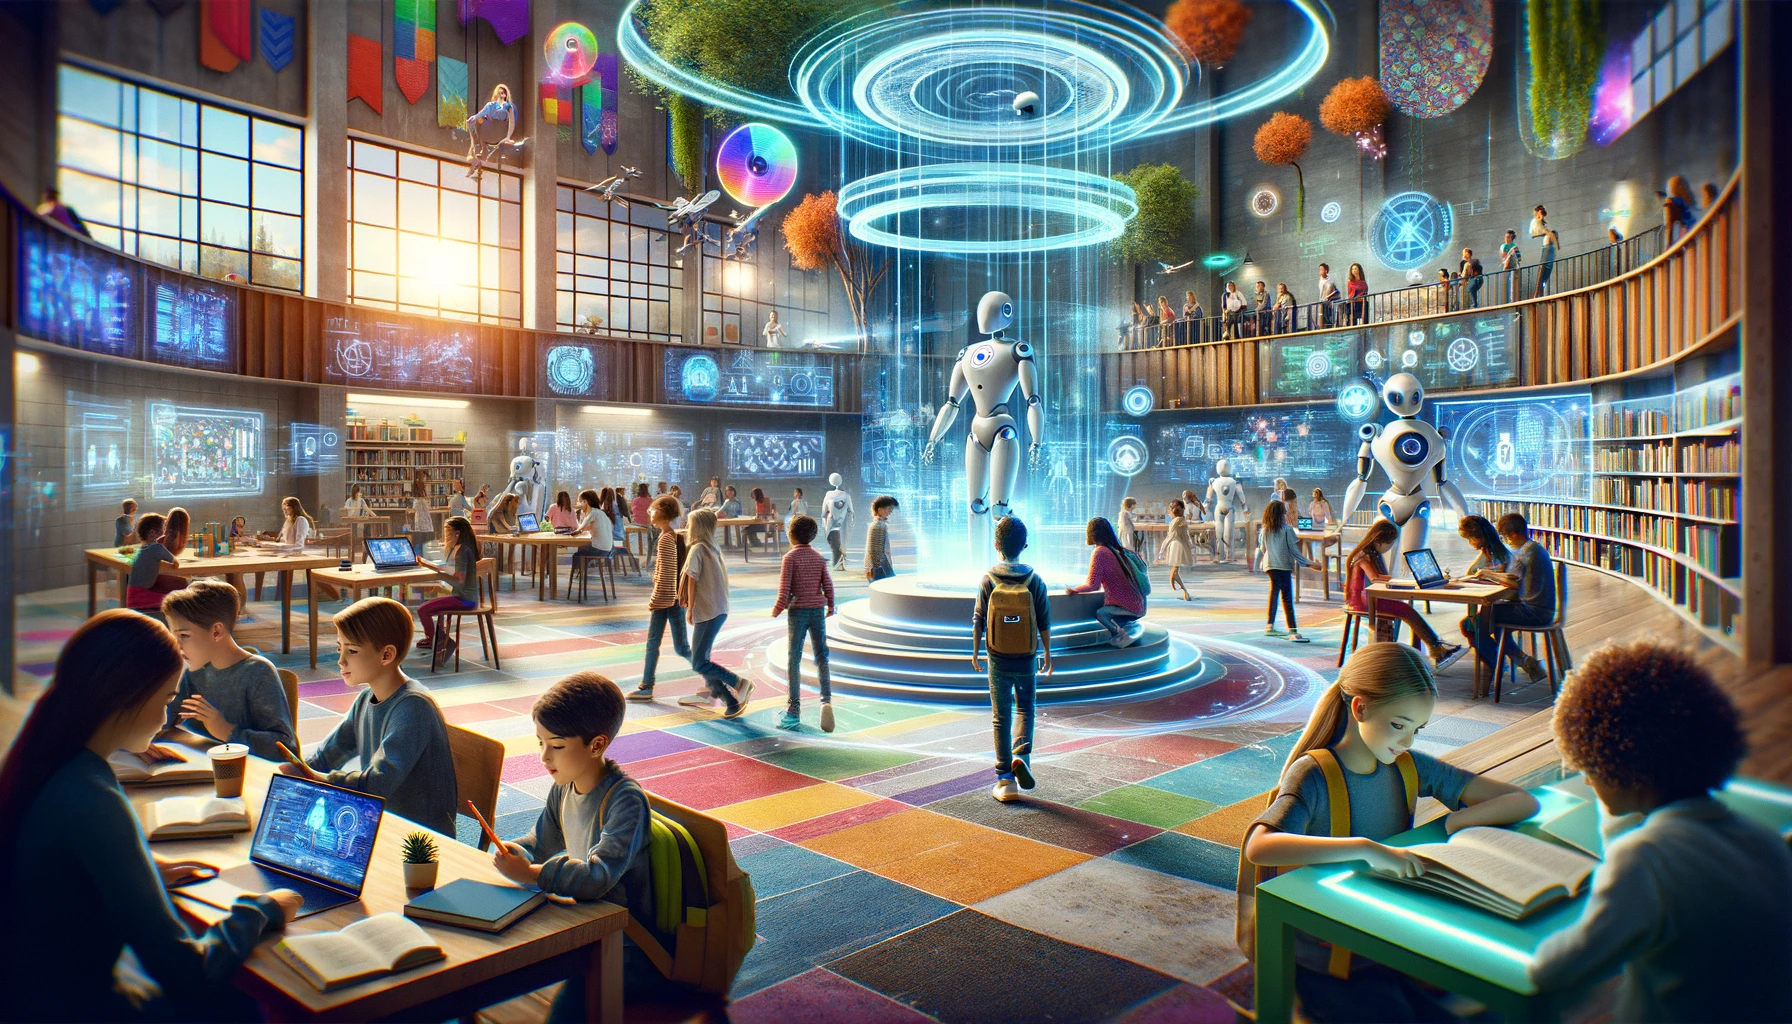 A futuristic and vibrant classroom showcasing diverse students engaged in personalized learning with AI technology, including holographic displays, VR headsets, and robot tutors, in a space blending nature and advanced tech.